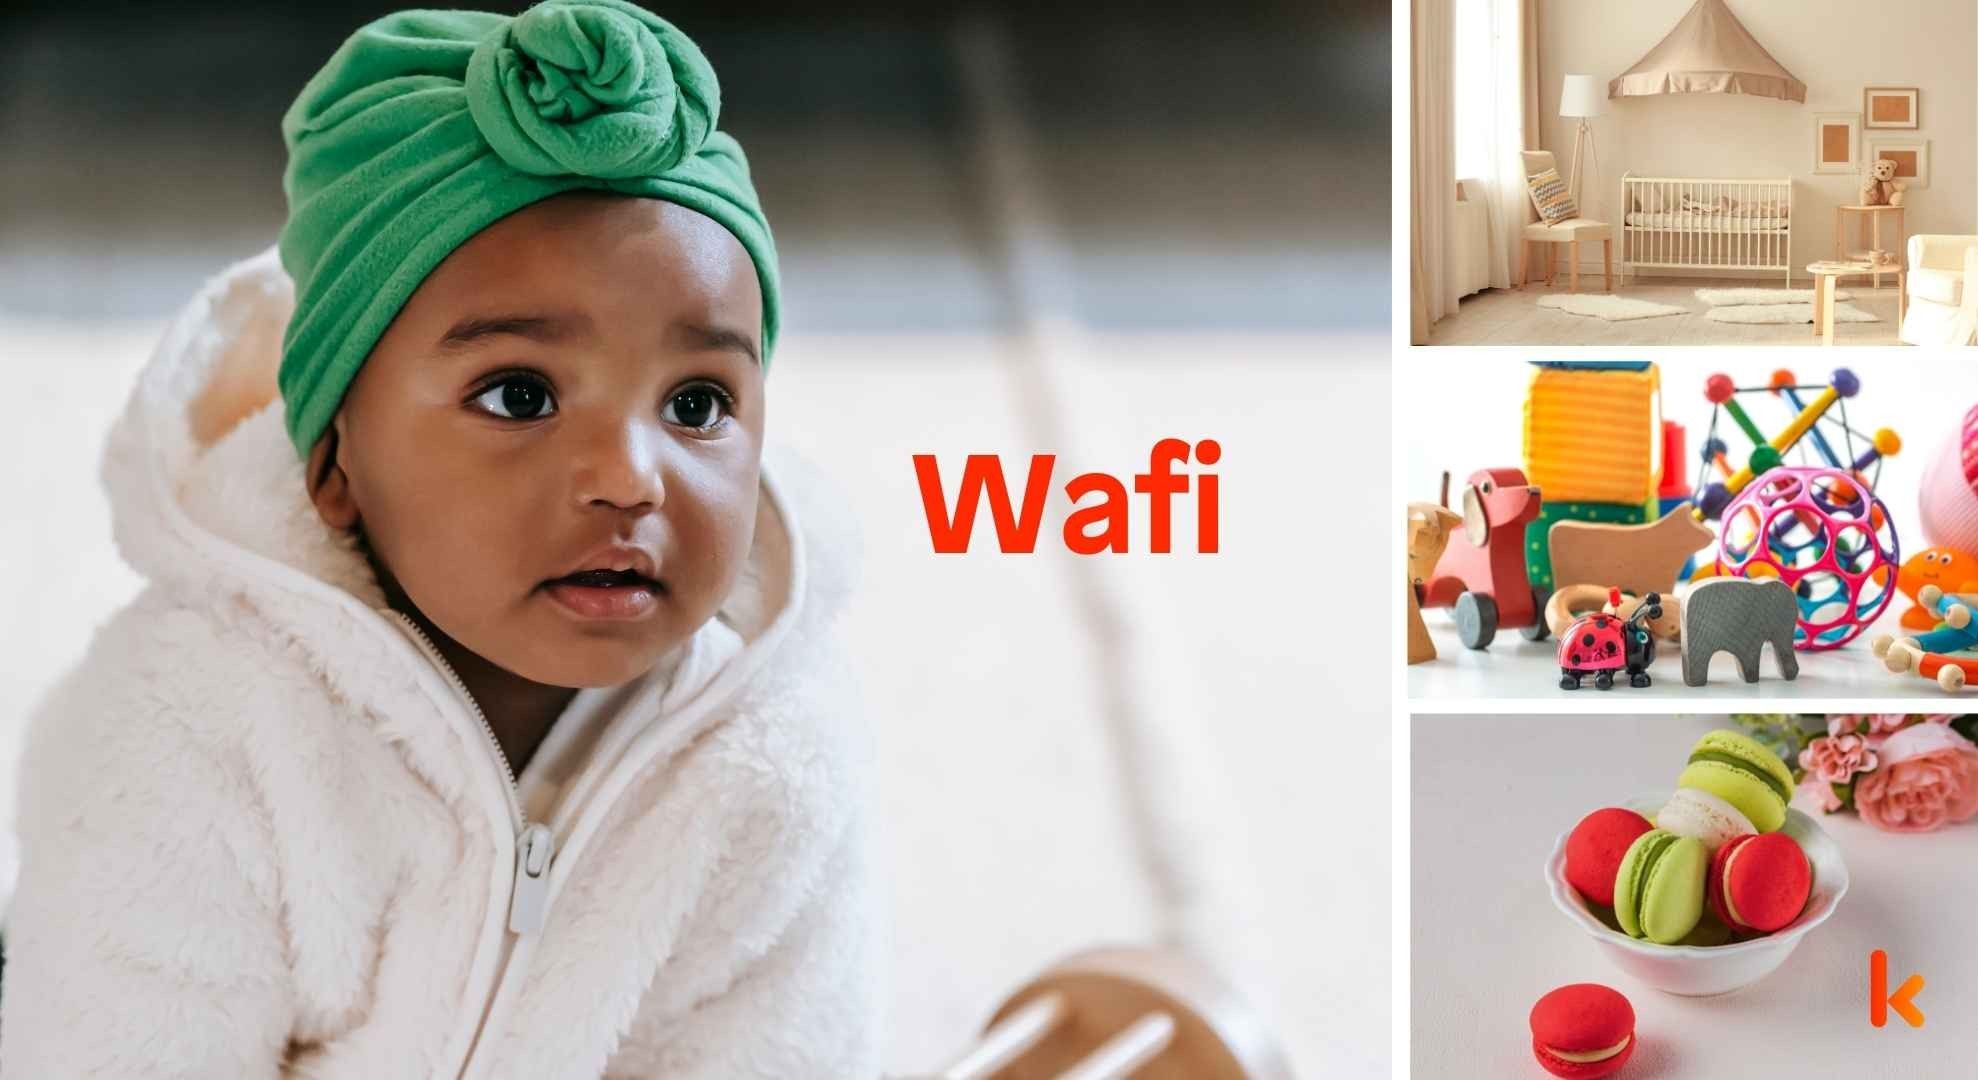 Meaning of the name Wafi